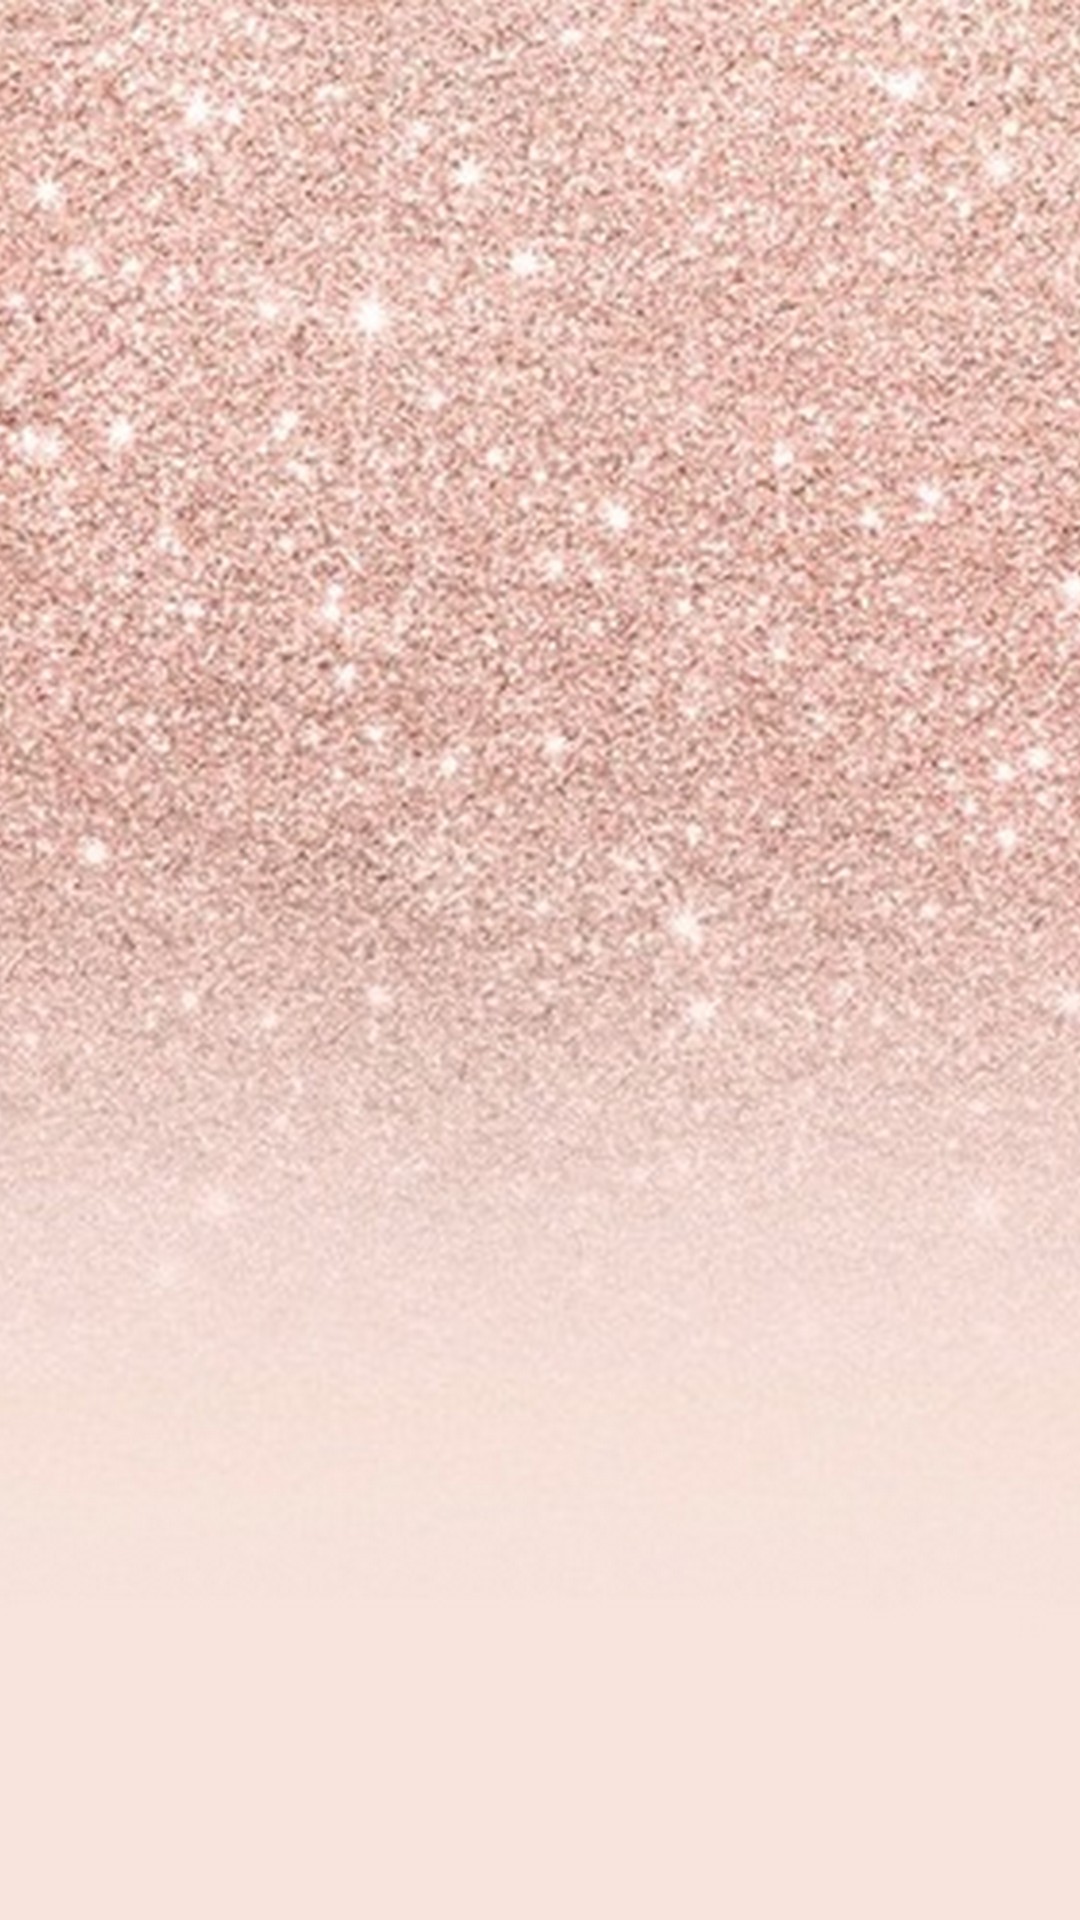 Wallpaper Rose Gold Glitter Android with HD resolution 1080x1920